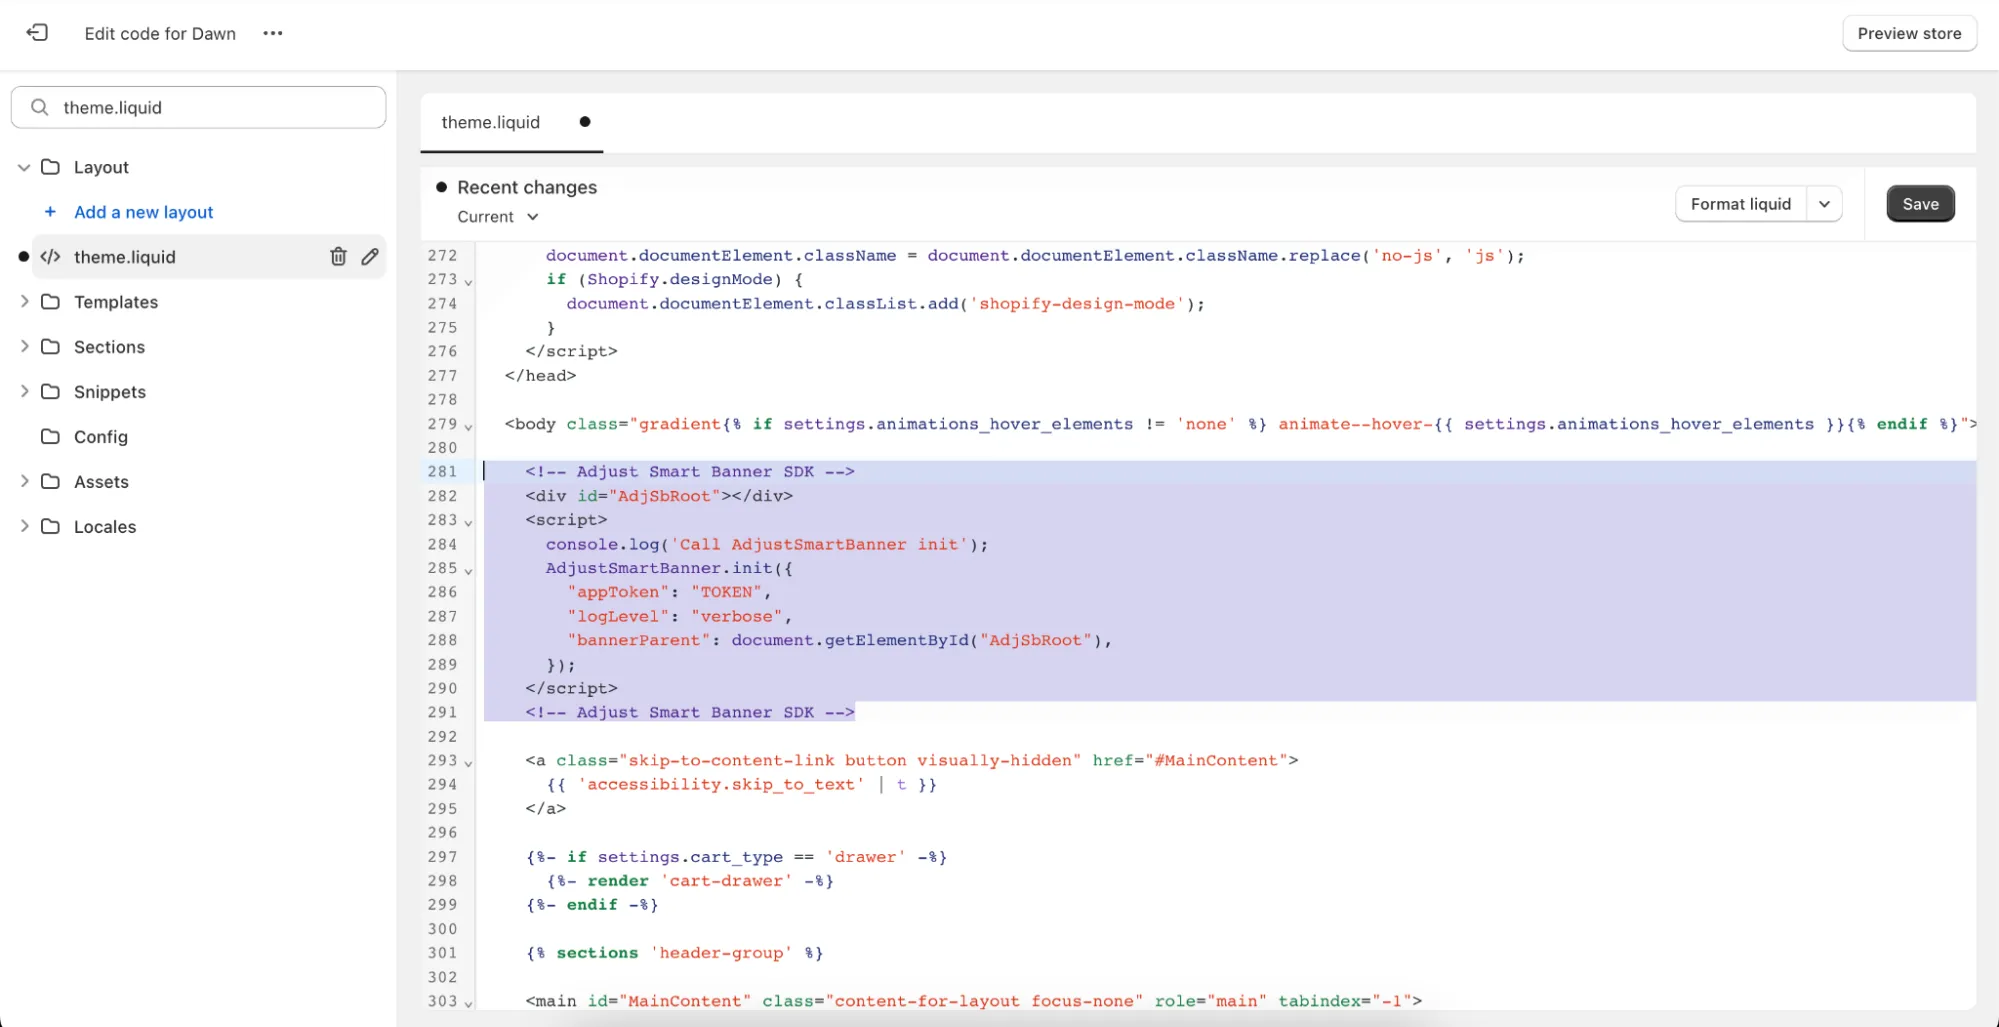 A screenshot of the Shopify theme editor showing the Smart Banner SDK init options